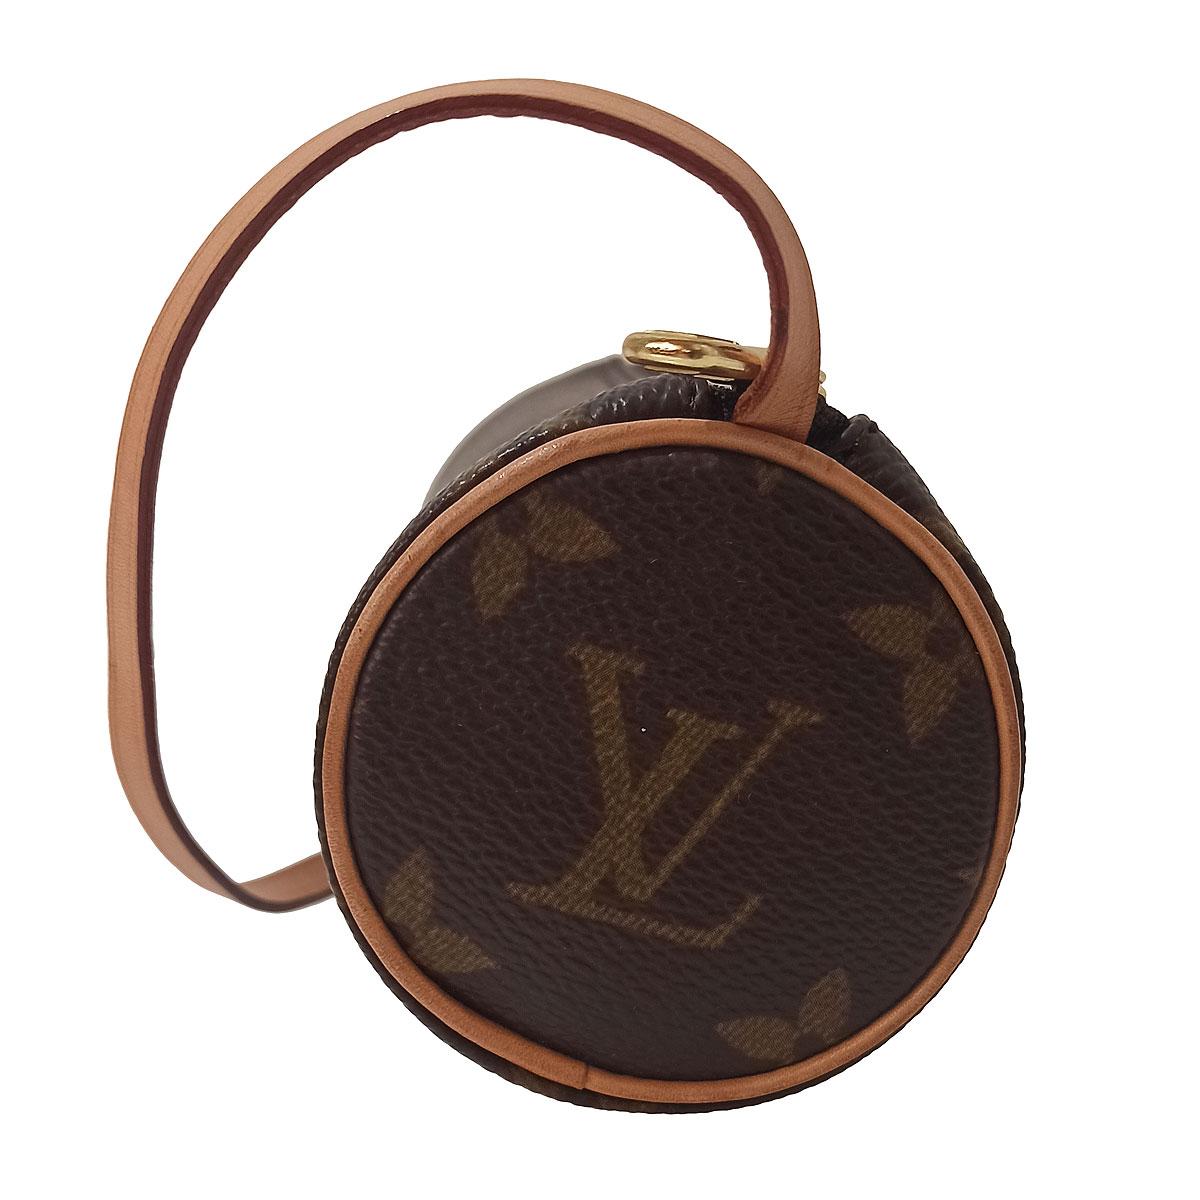 Beautiful  and iconic LV papillon pouch
Canvas
Monogram
Natural vacchetta
Zip closure
Golden metal
Cm 15,5 x 6,5 x 6,5 (6,1 x 2,55  x 2.55 inches)
Worldwide express shipping included in the price !